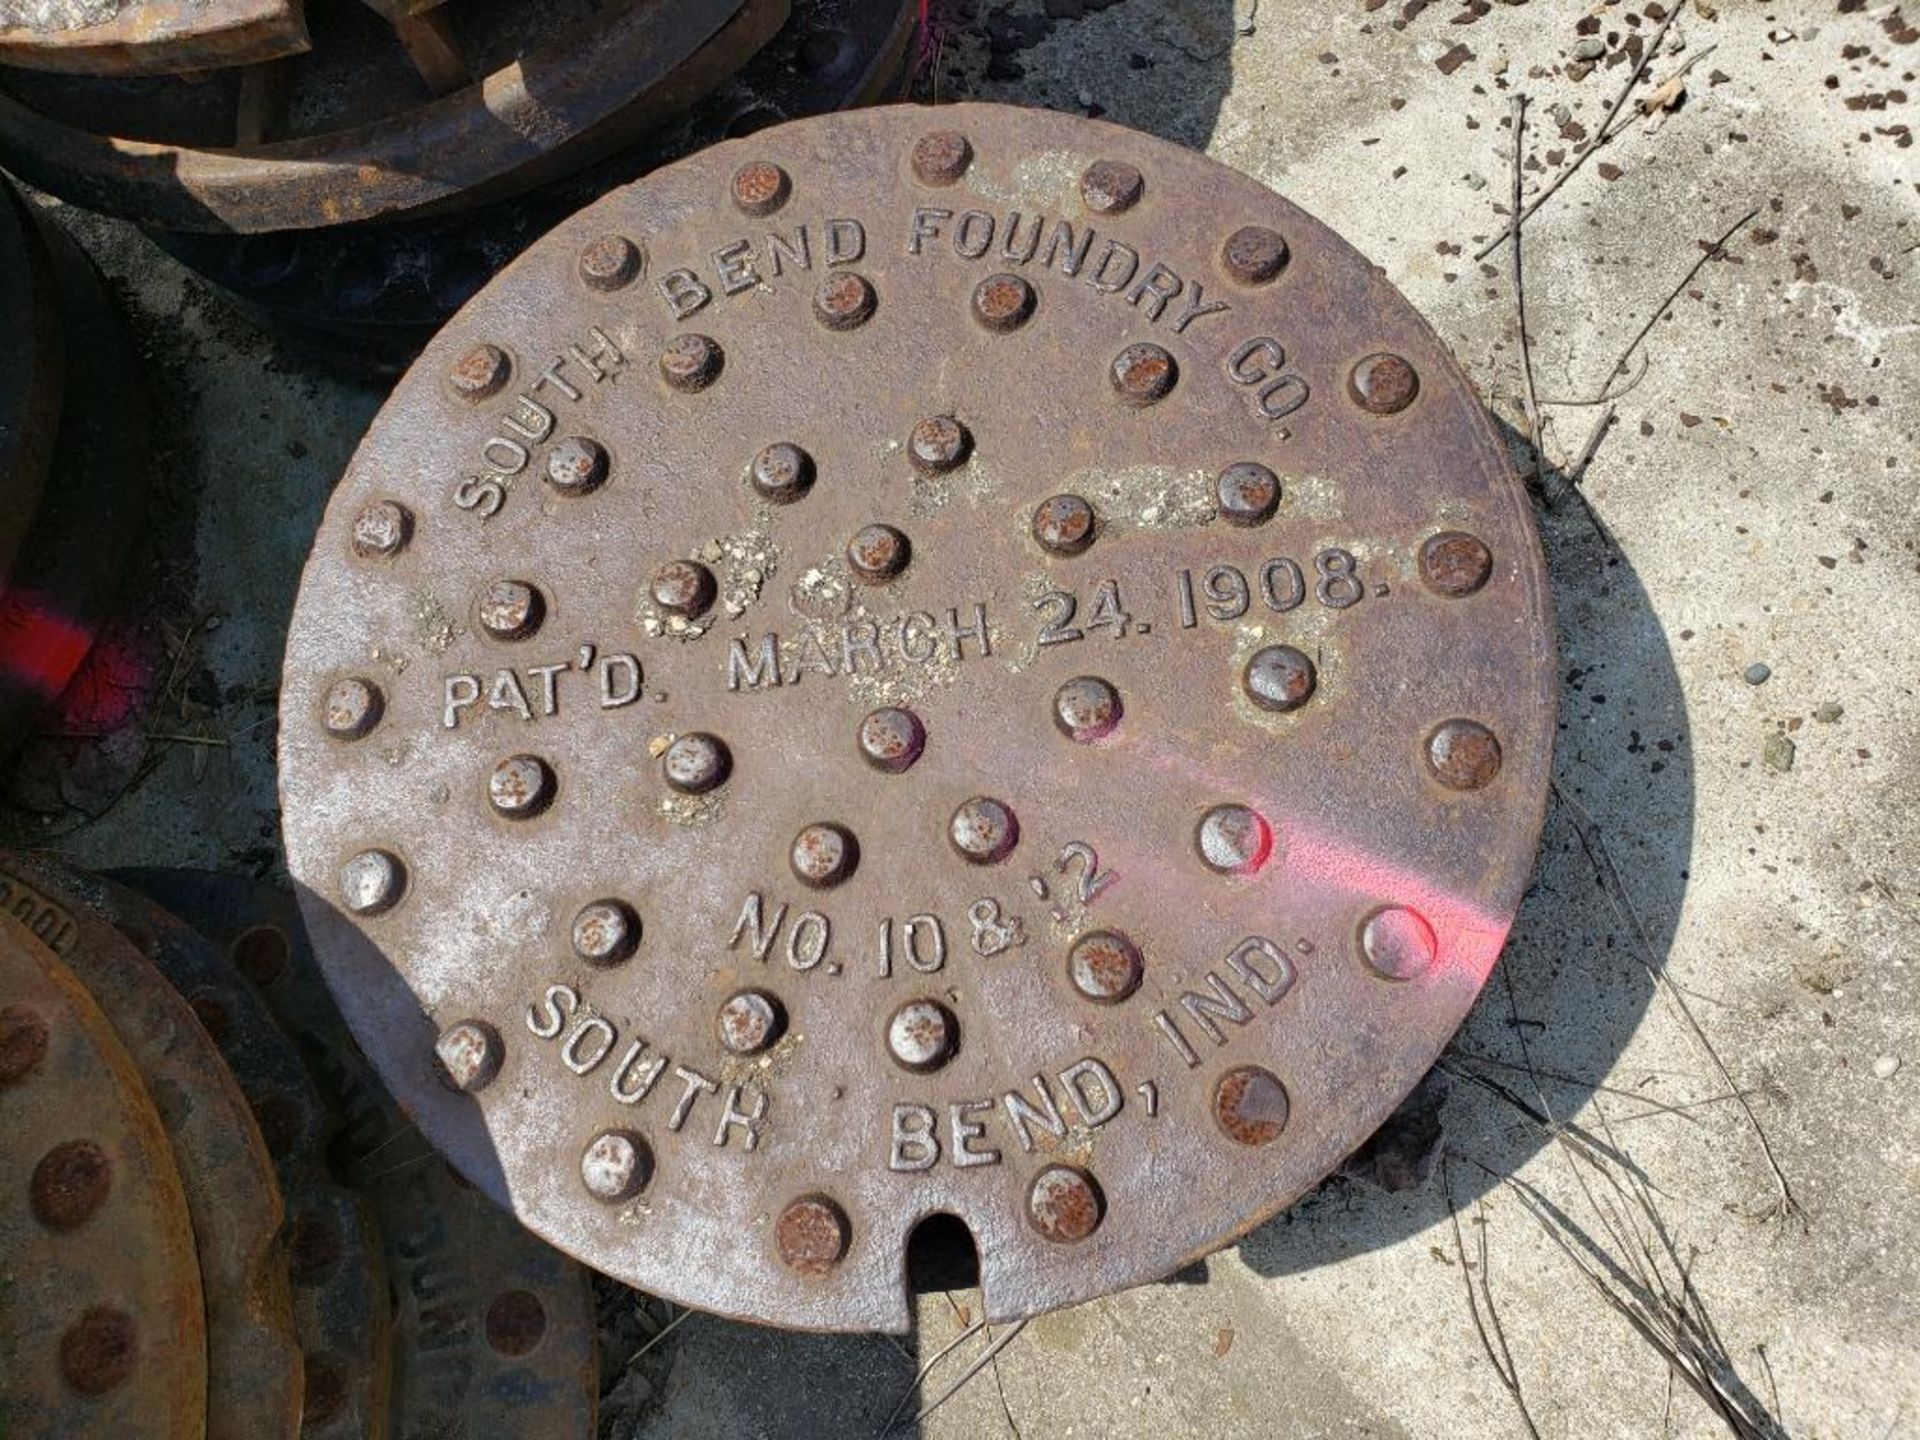 Assorted man hole covers. (units with pink marking are NOT included in lot) - Image 7 of 8